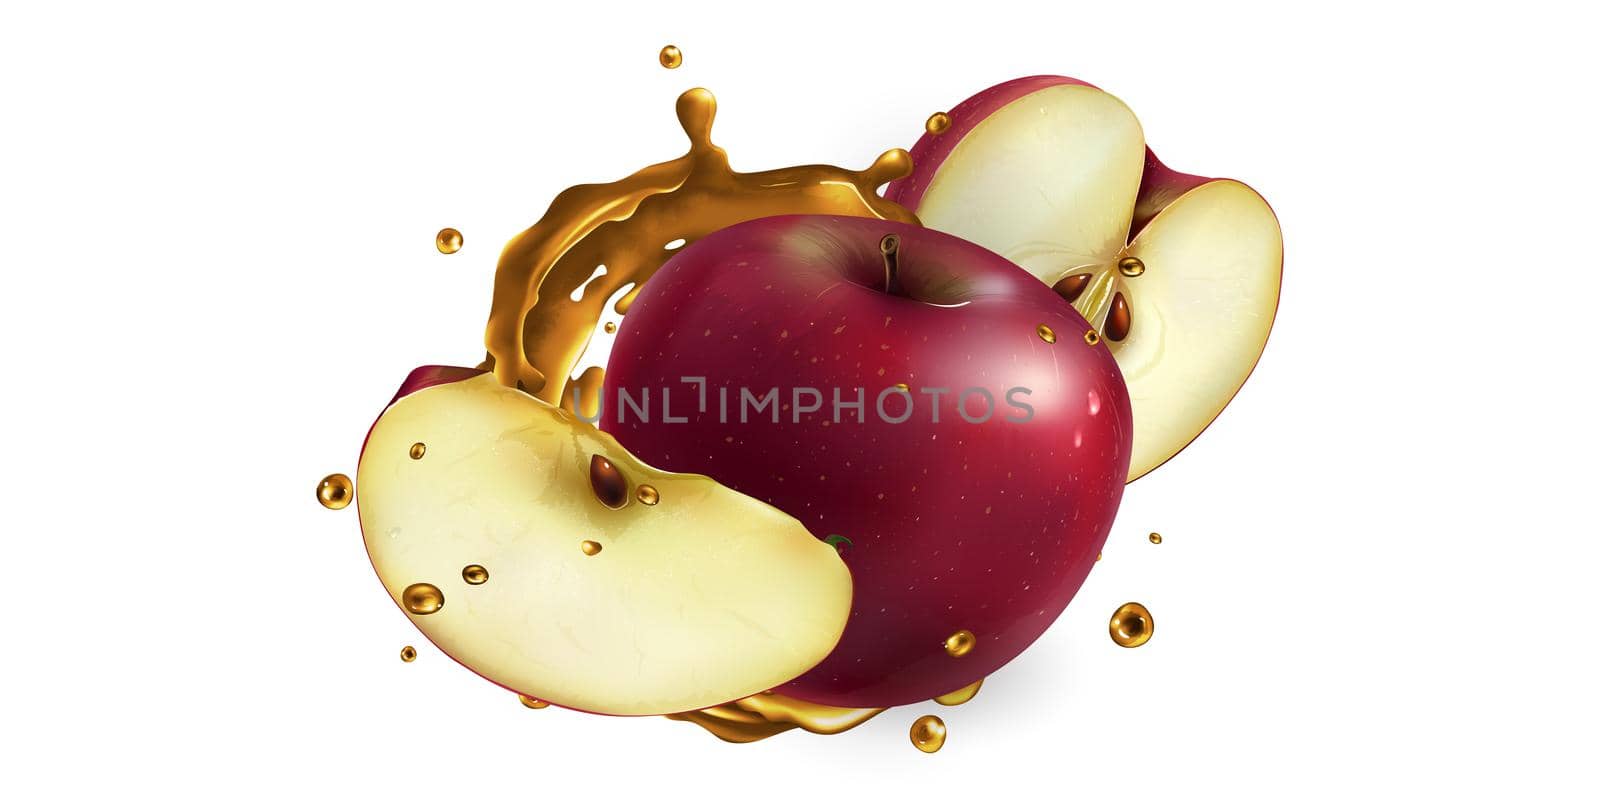 Whole and sliced red apples in fruit juice splashes on a white background. Realistic style illustration.